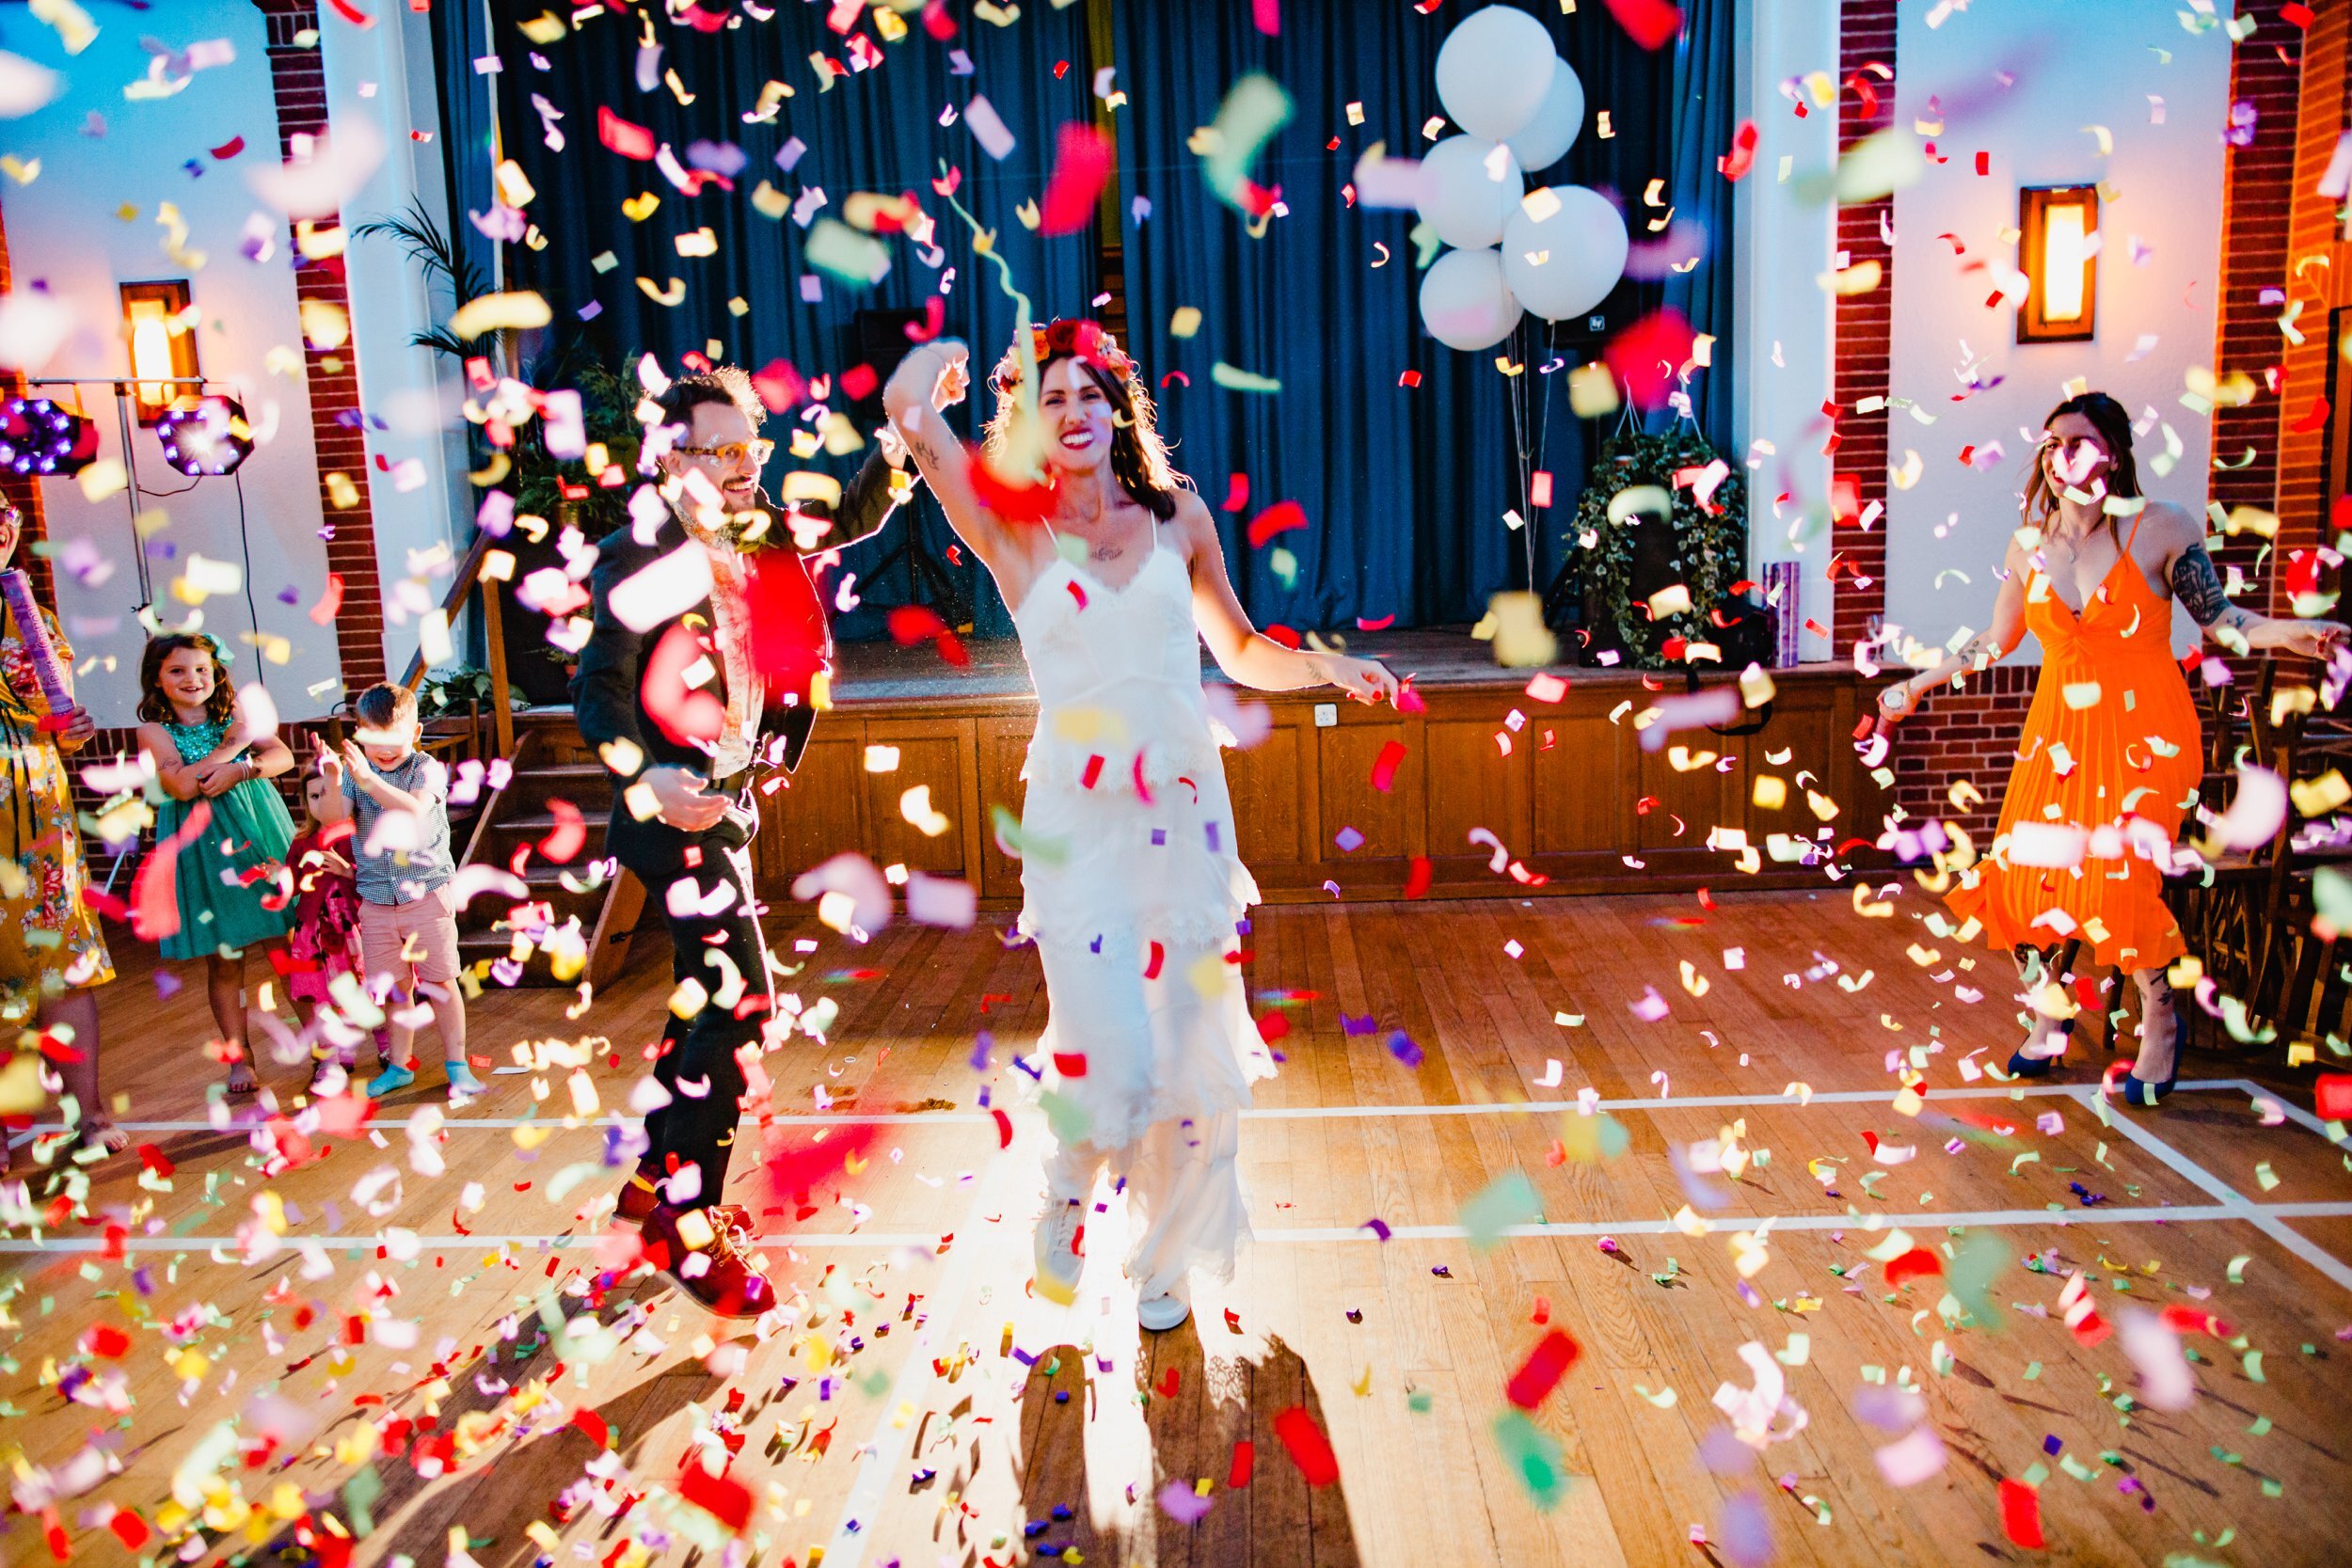 First dance at a wedding with confetti canons